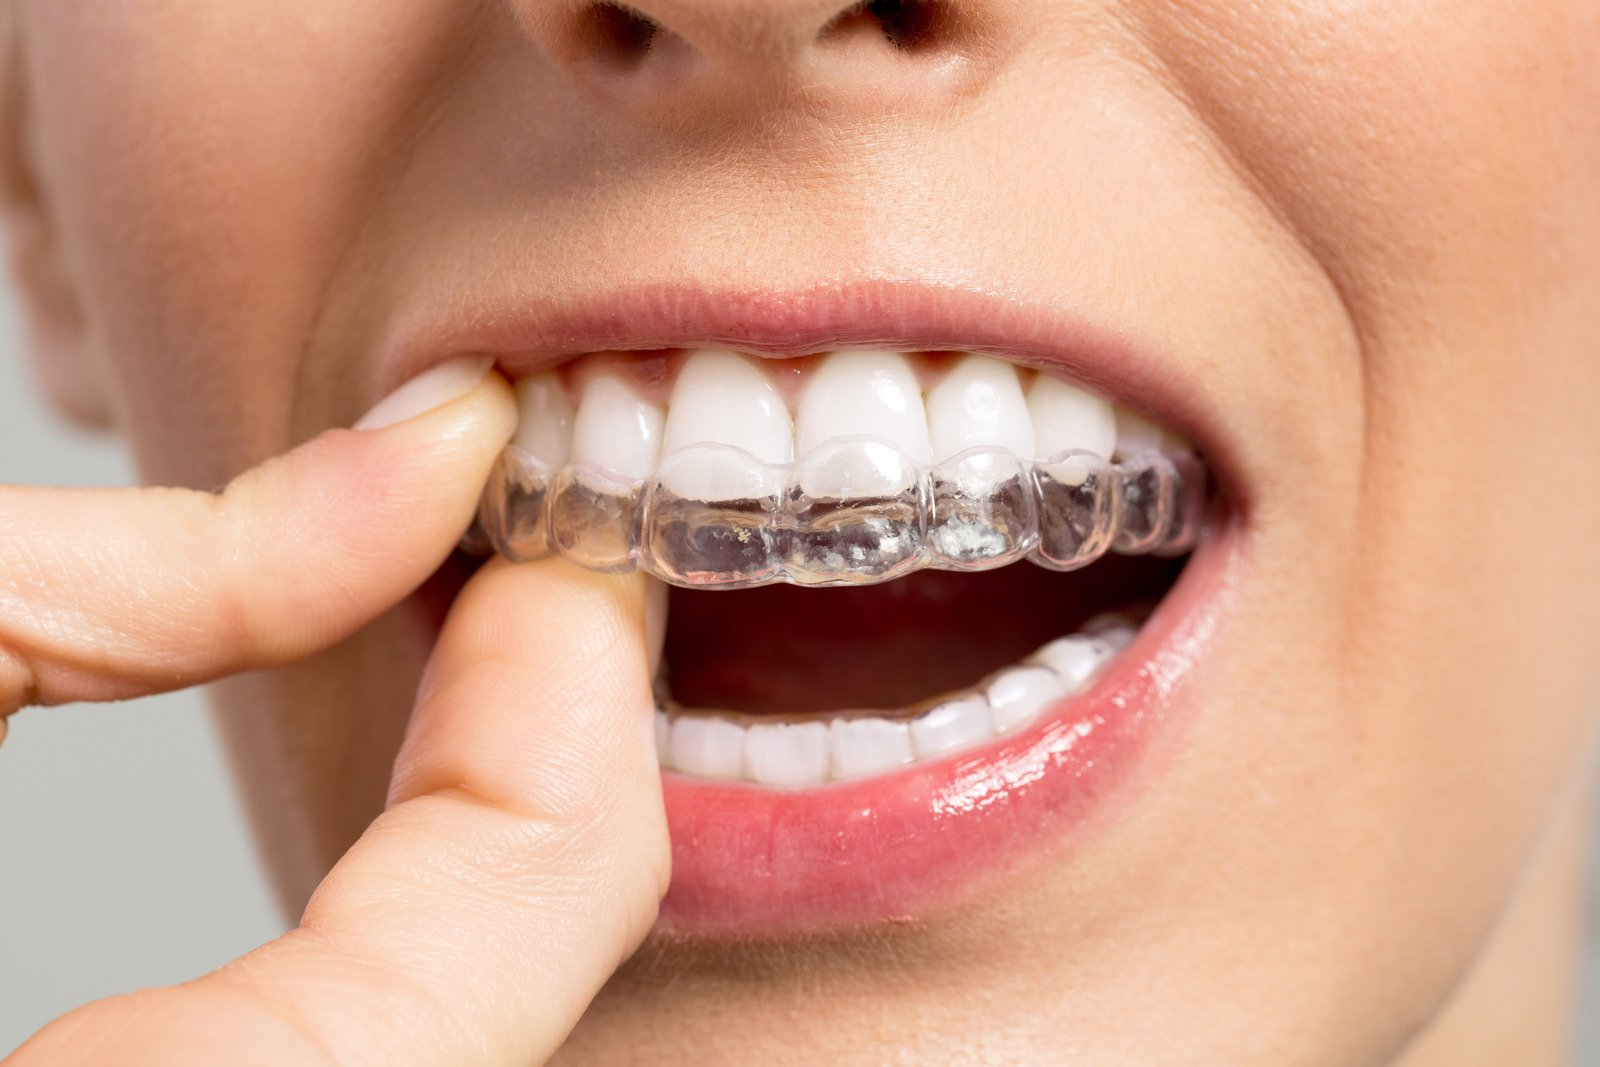 Clear aligners, pain or discomfot, pain relief